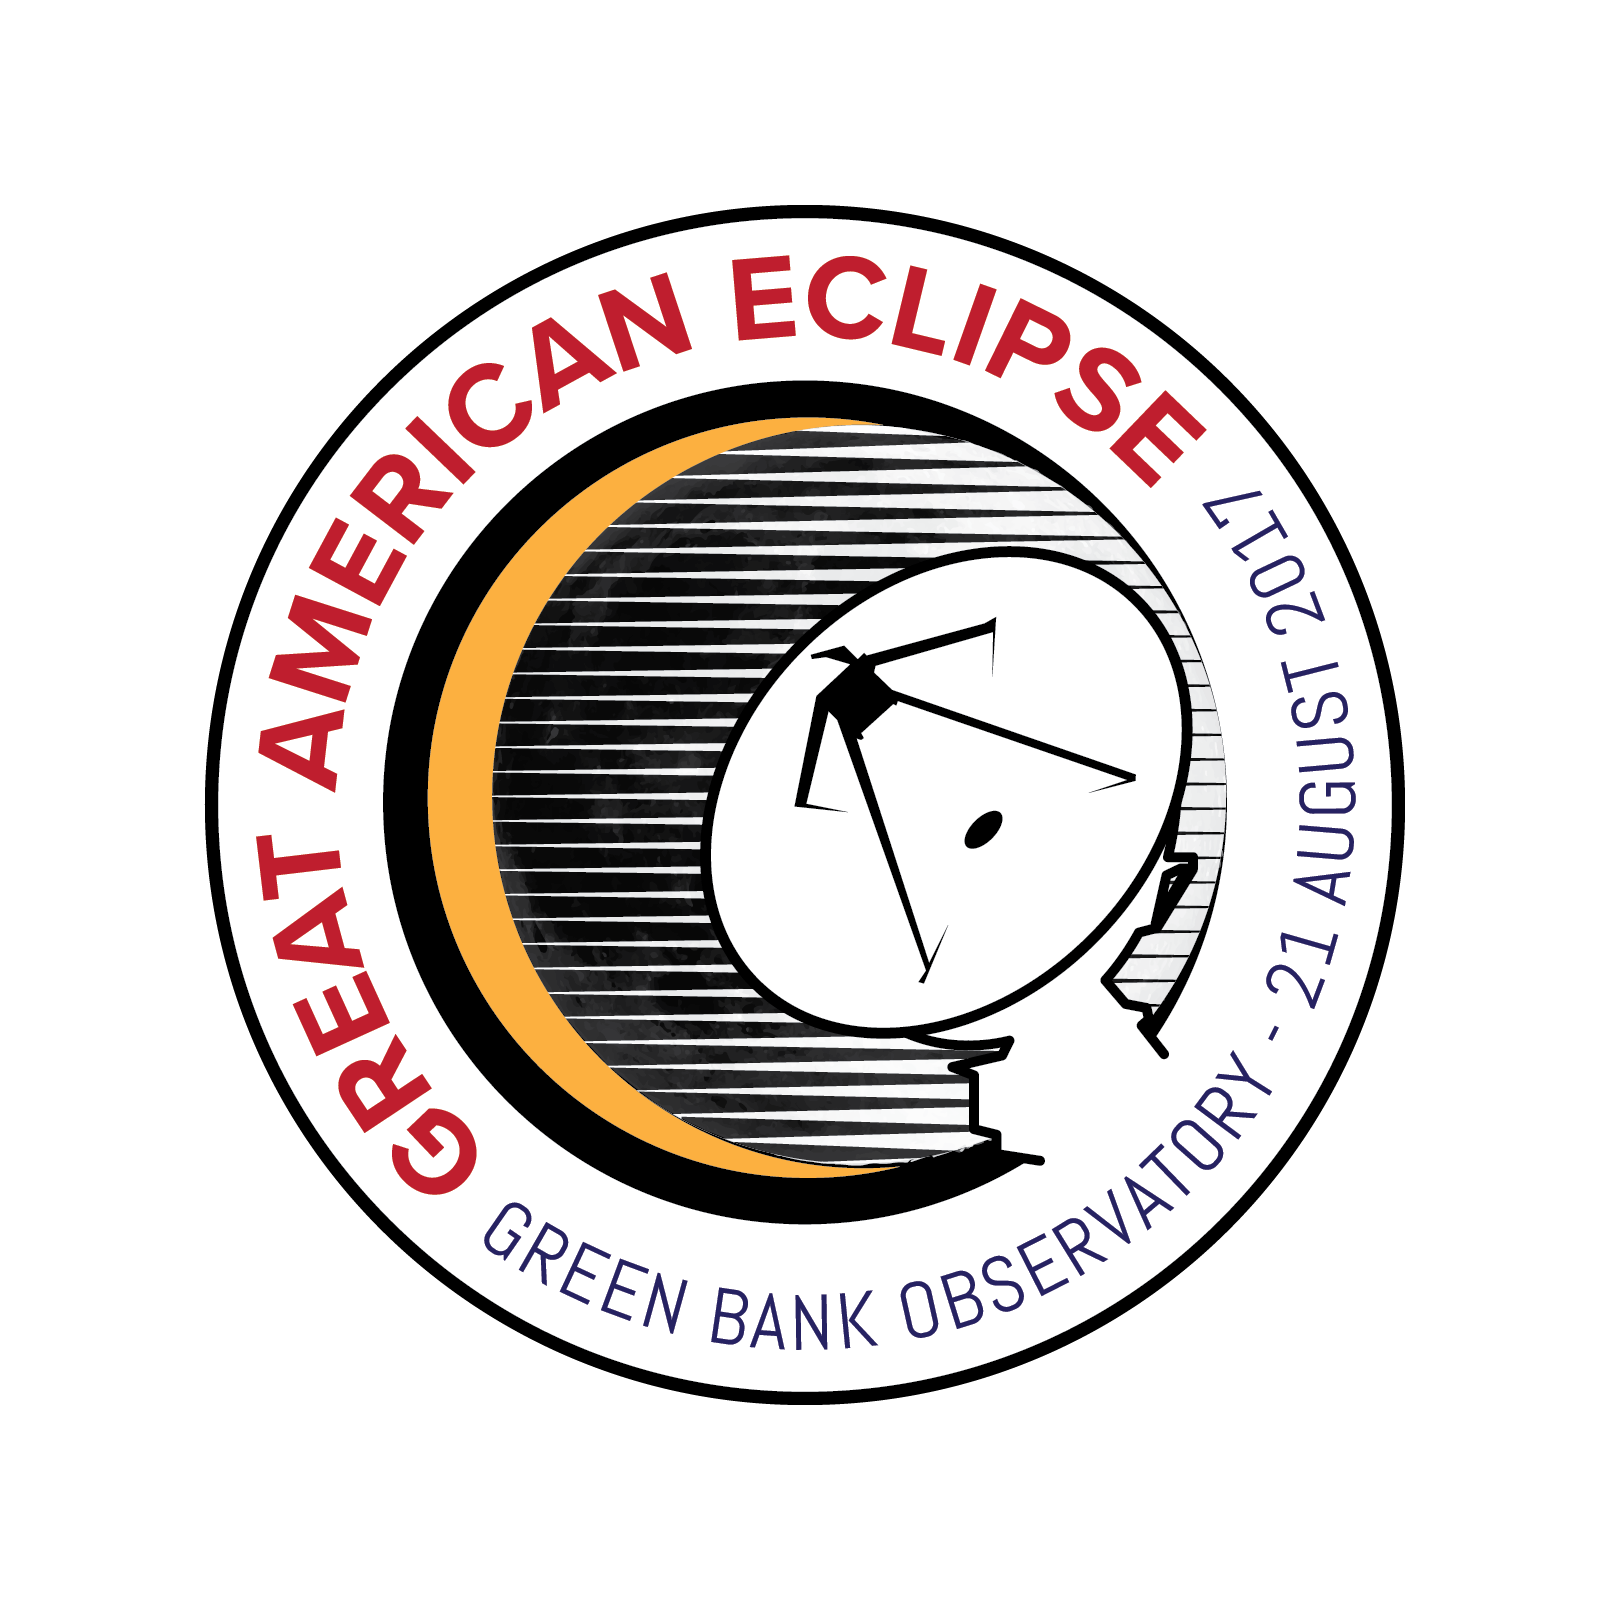 Sticker – the Great American Eclipse